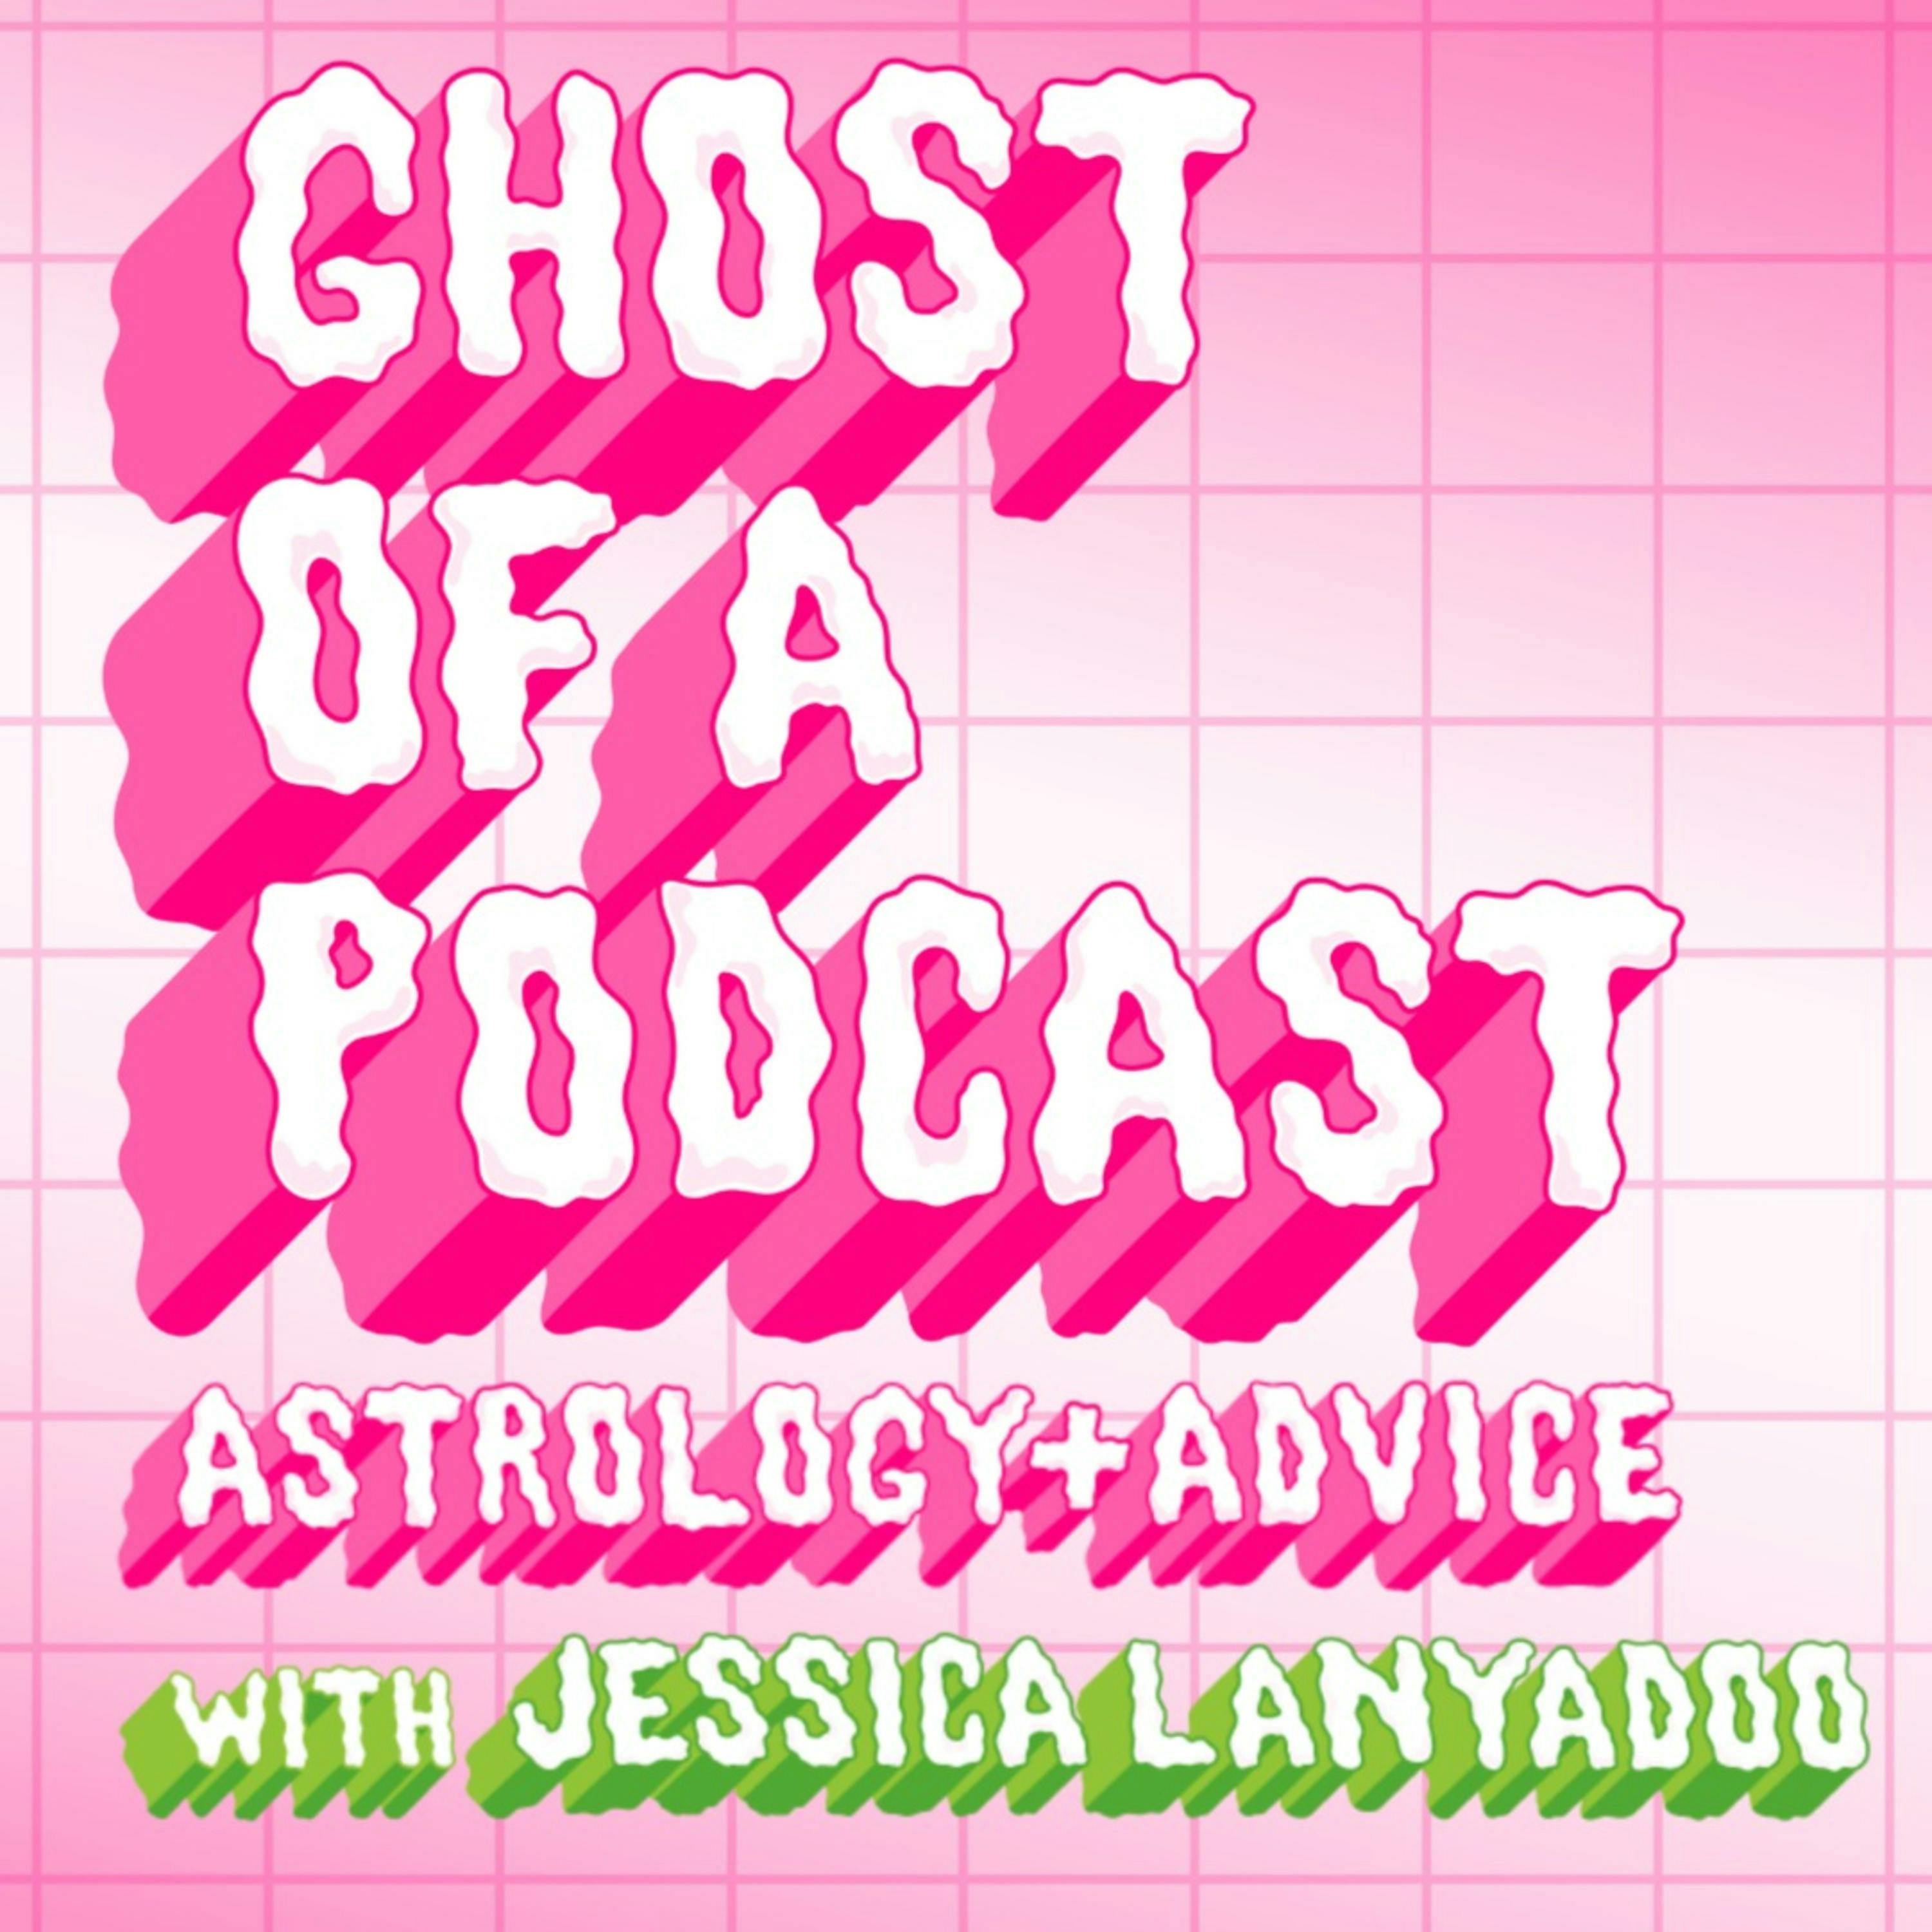 398: Horoscope - It's All Trines + A Sextile